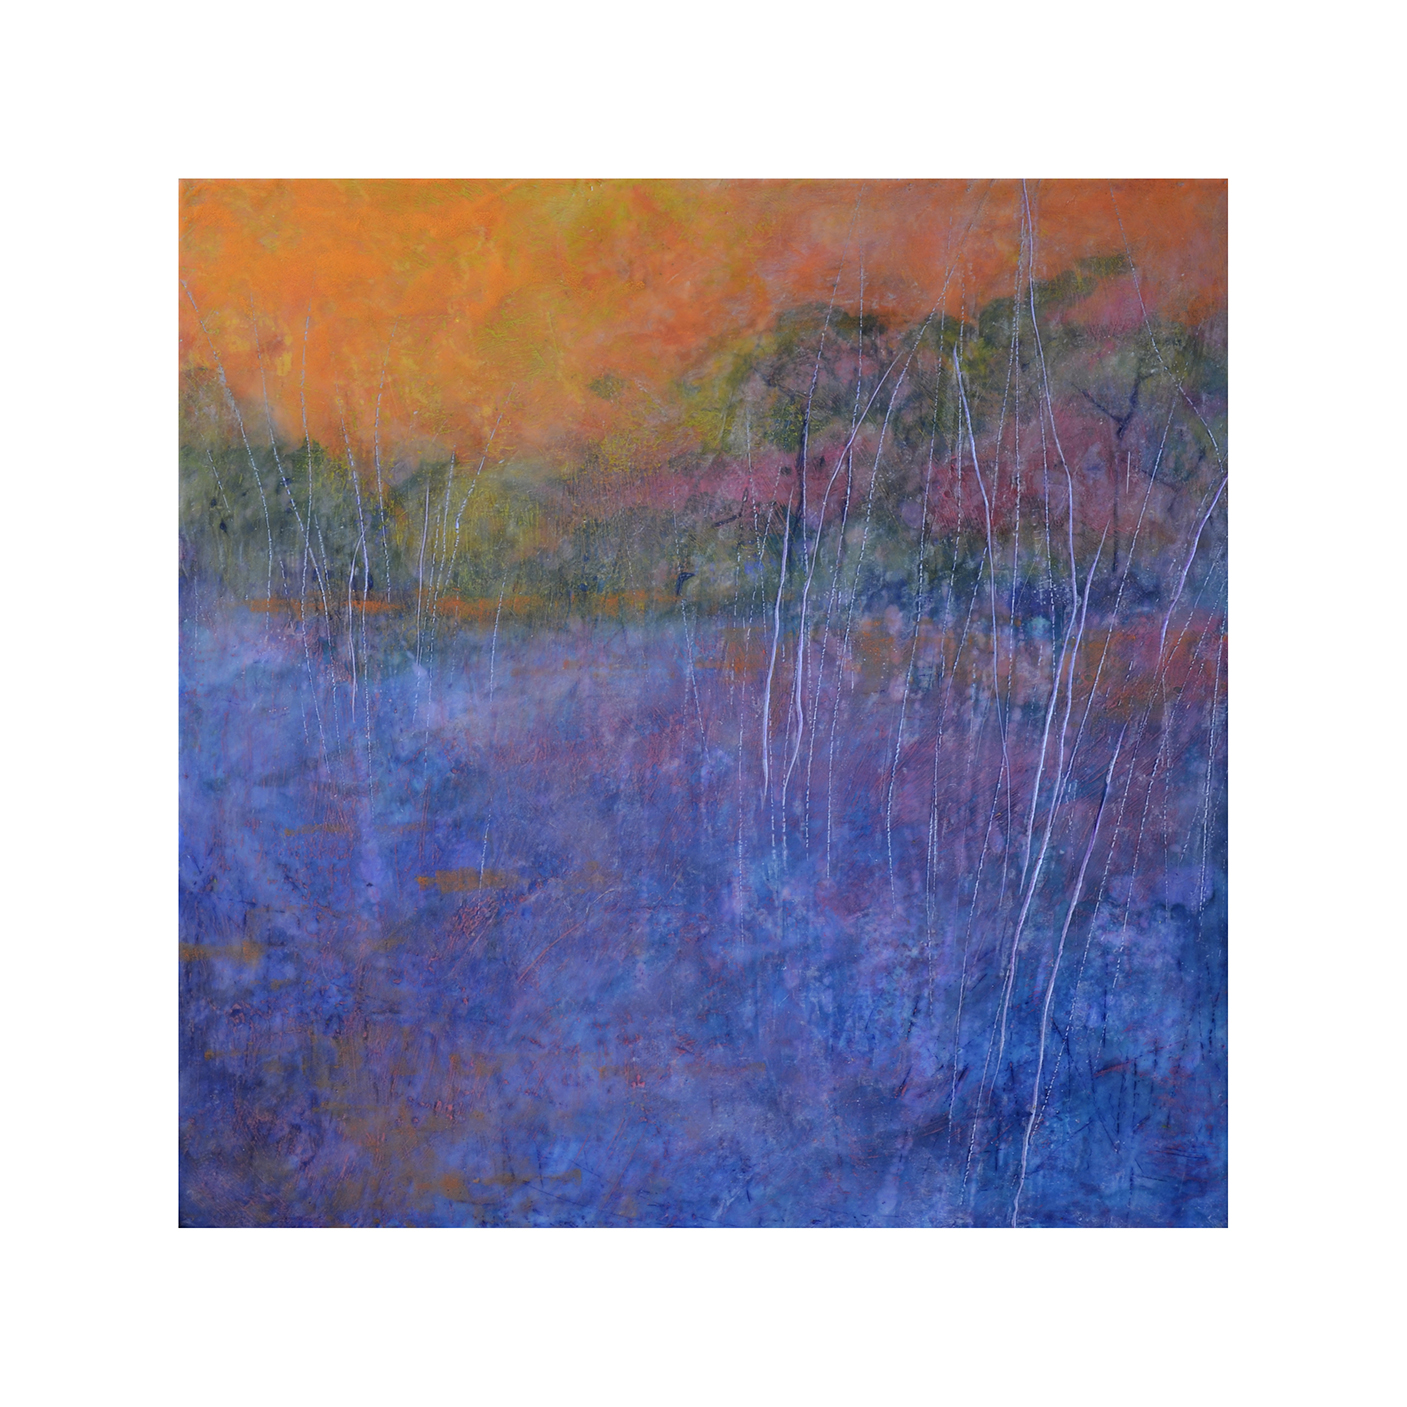   Evening Comes 3   24 x 24  Encaustic on Panel  $1000 